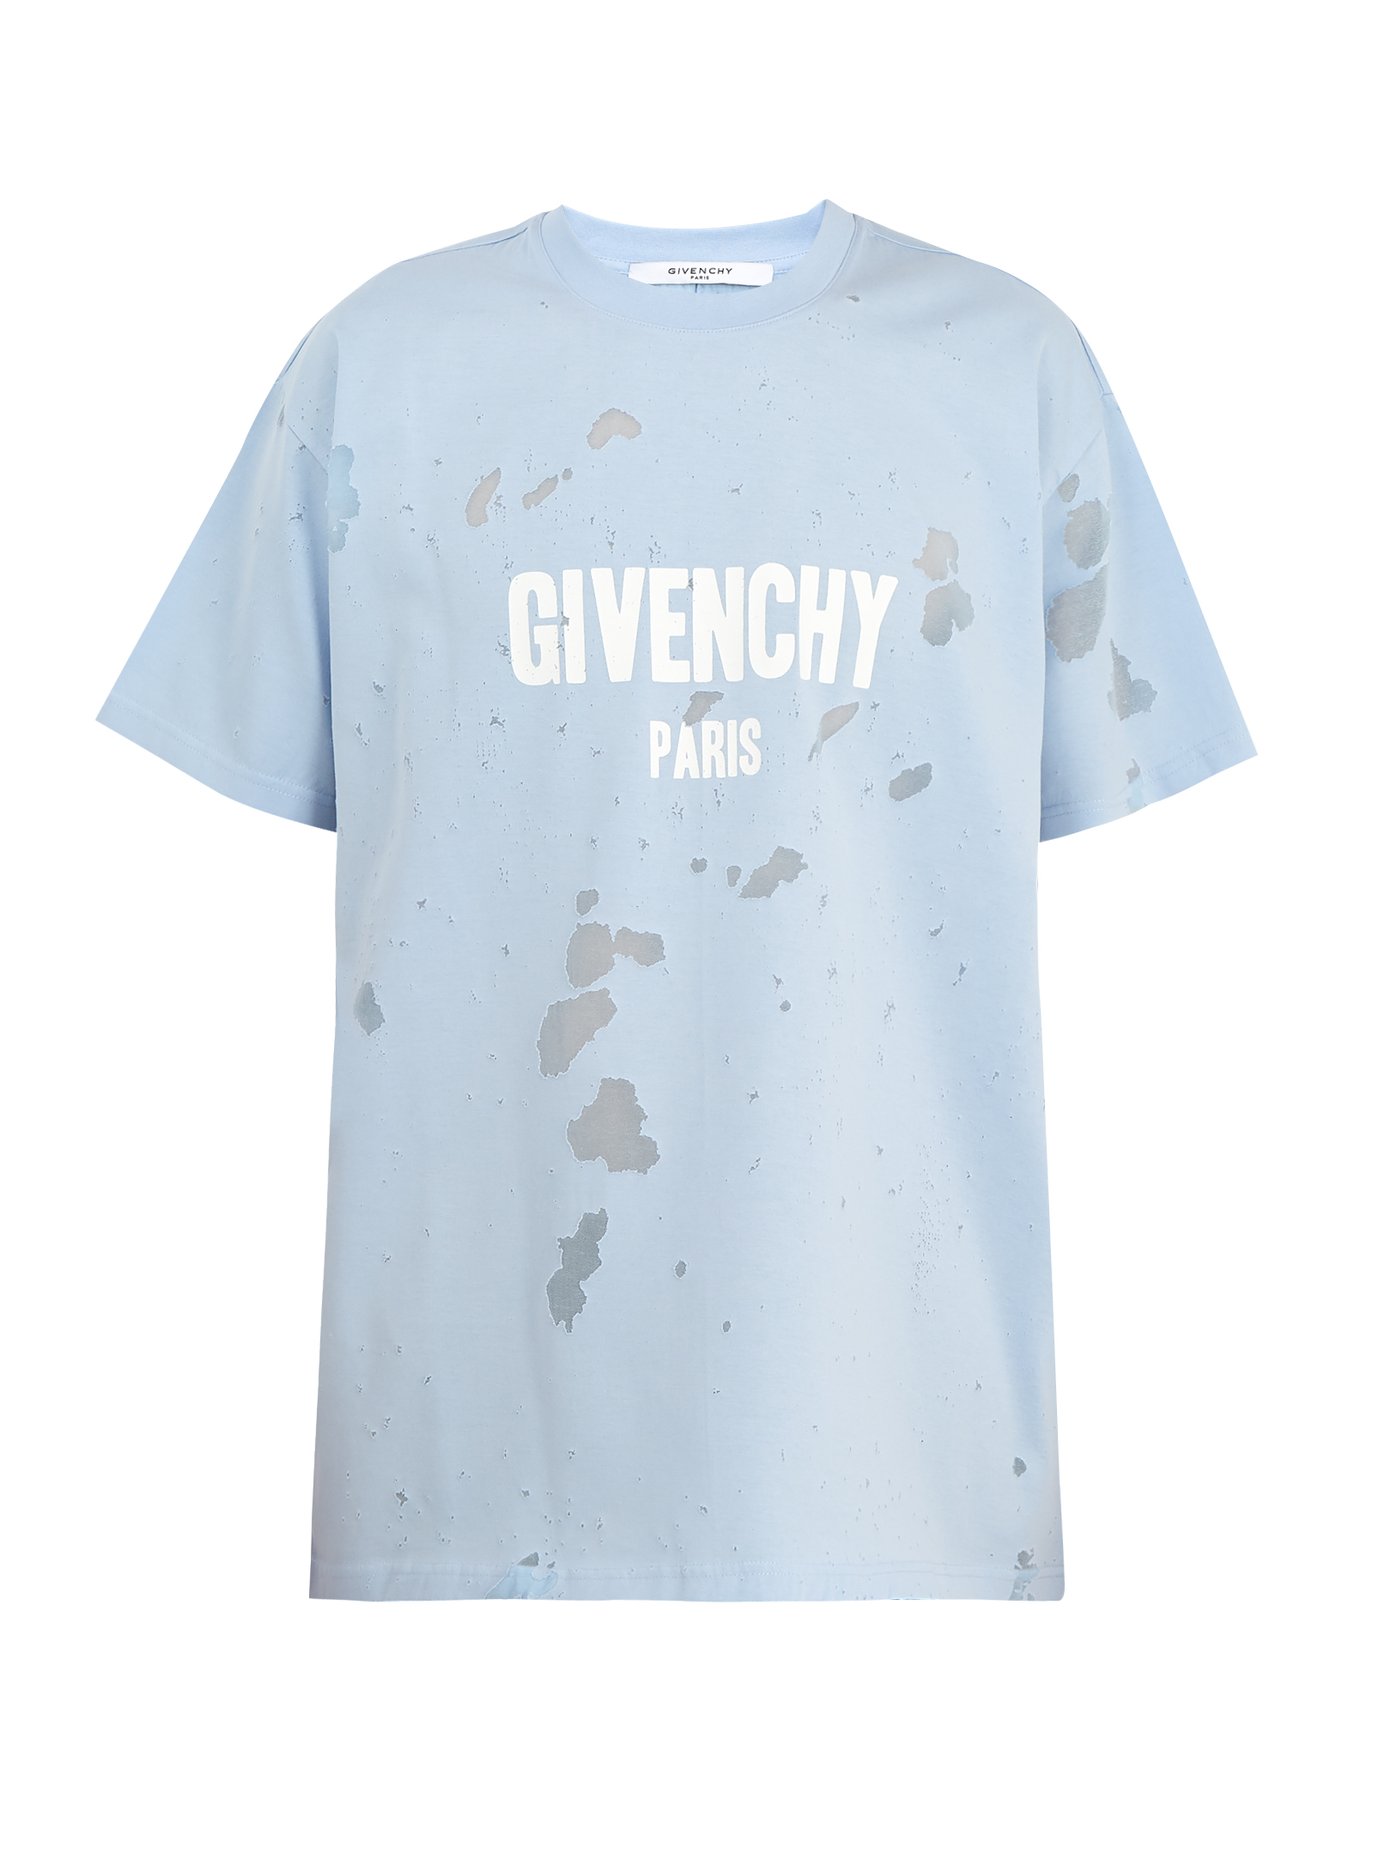 givenchy sweater ripped